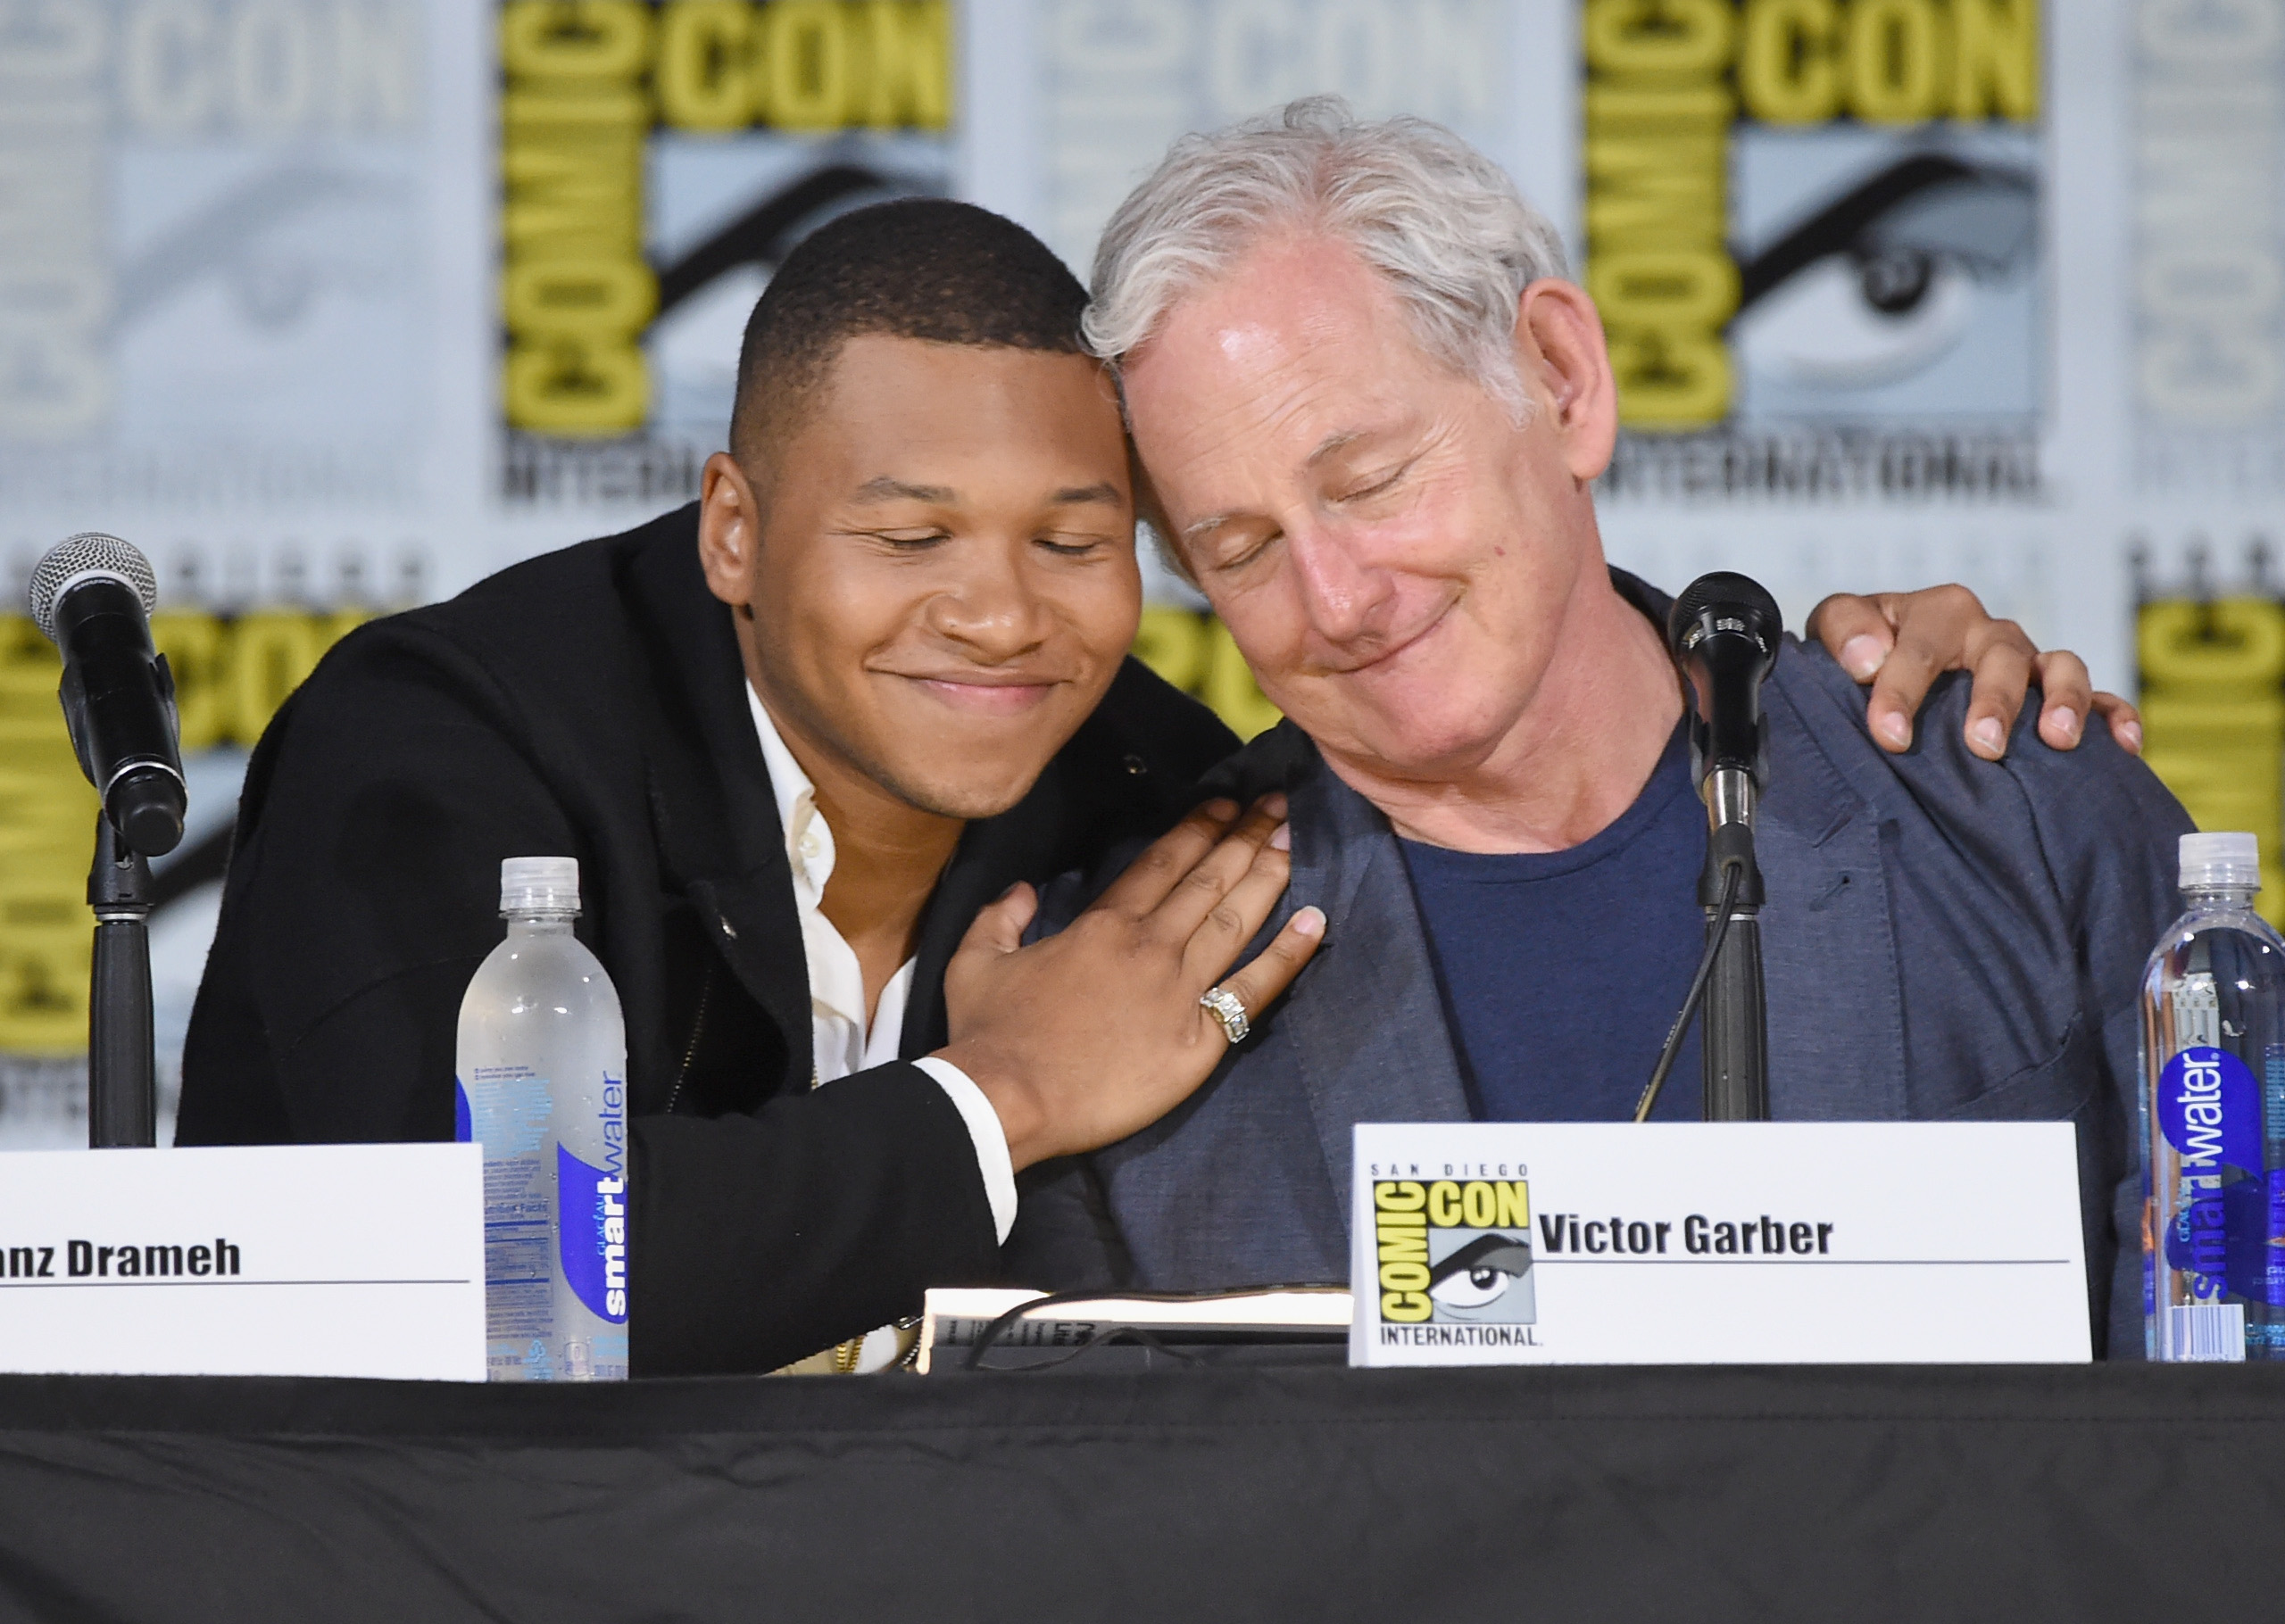 'DC's Legends of Tomorrow' actors Franz Drameh and Victor Garber embrace onstage during a panel at San Diego Comic-Con. Drameh wears a black suit over a white shirt. Garber wears a blue suit over a blue shirt.